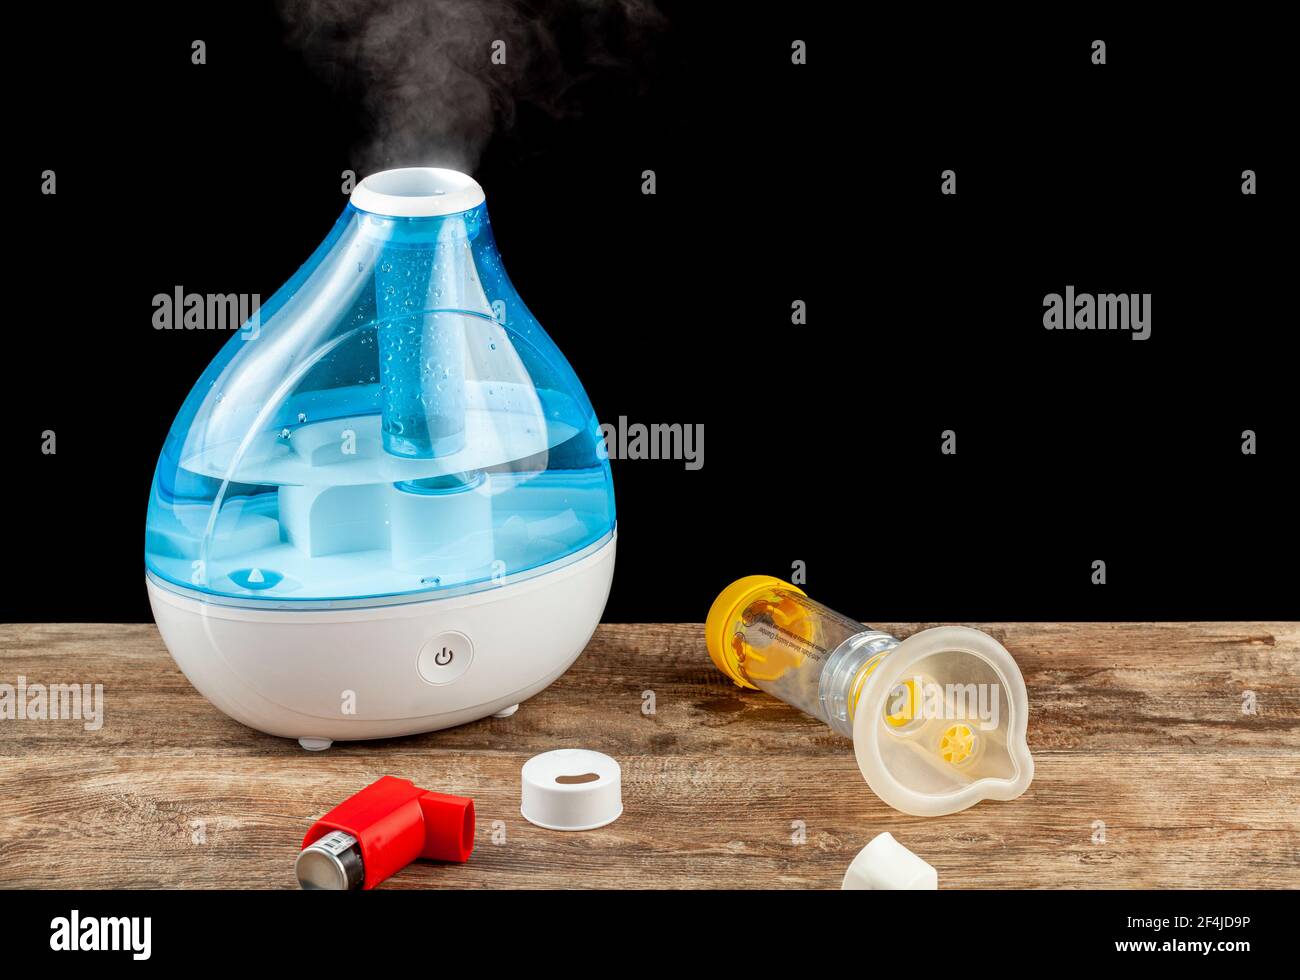 asthma, allergy airway problem, pulmonary disorders concept with ultrasonic tabletop humidifier creating steam. Inhaler and chamber mask to deliver em Stock Photo